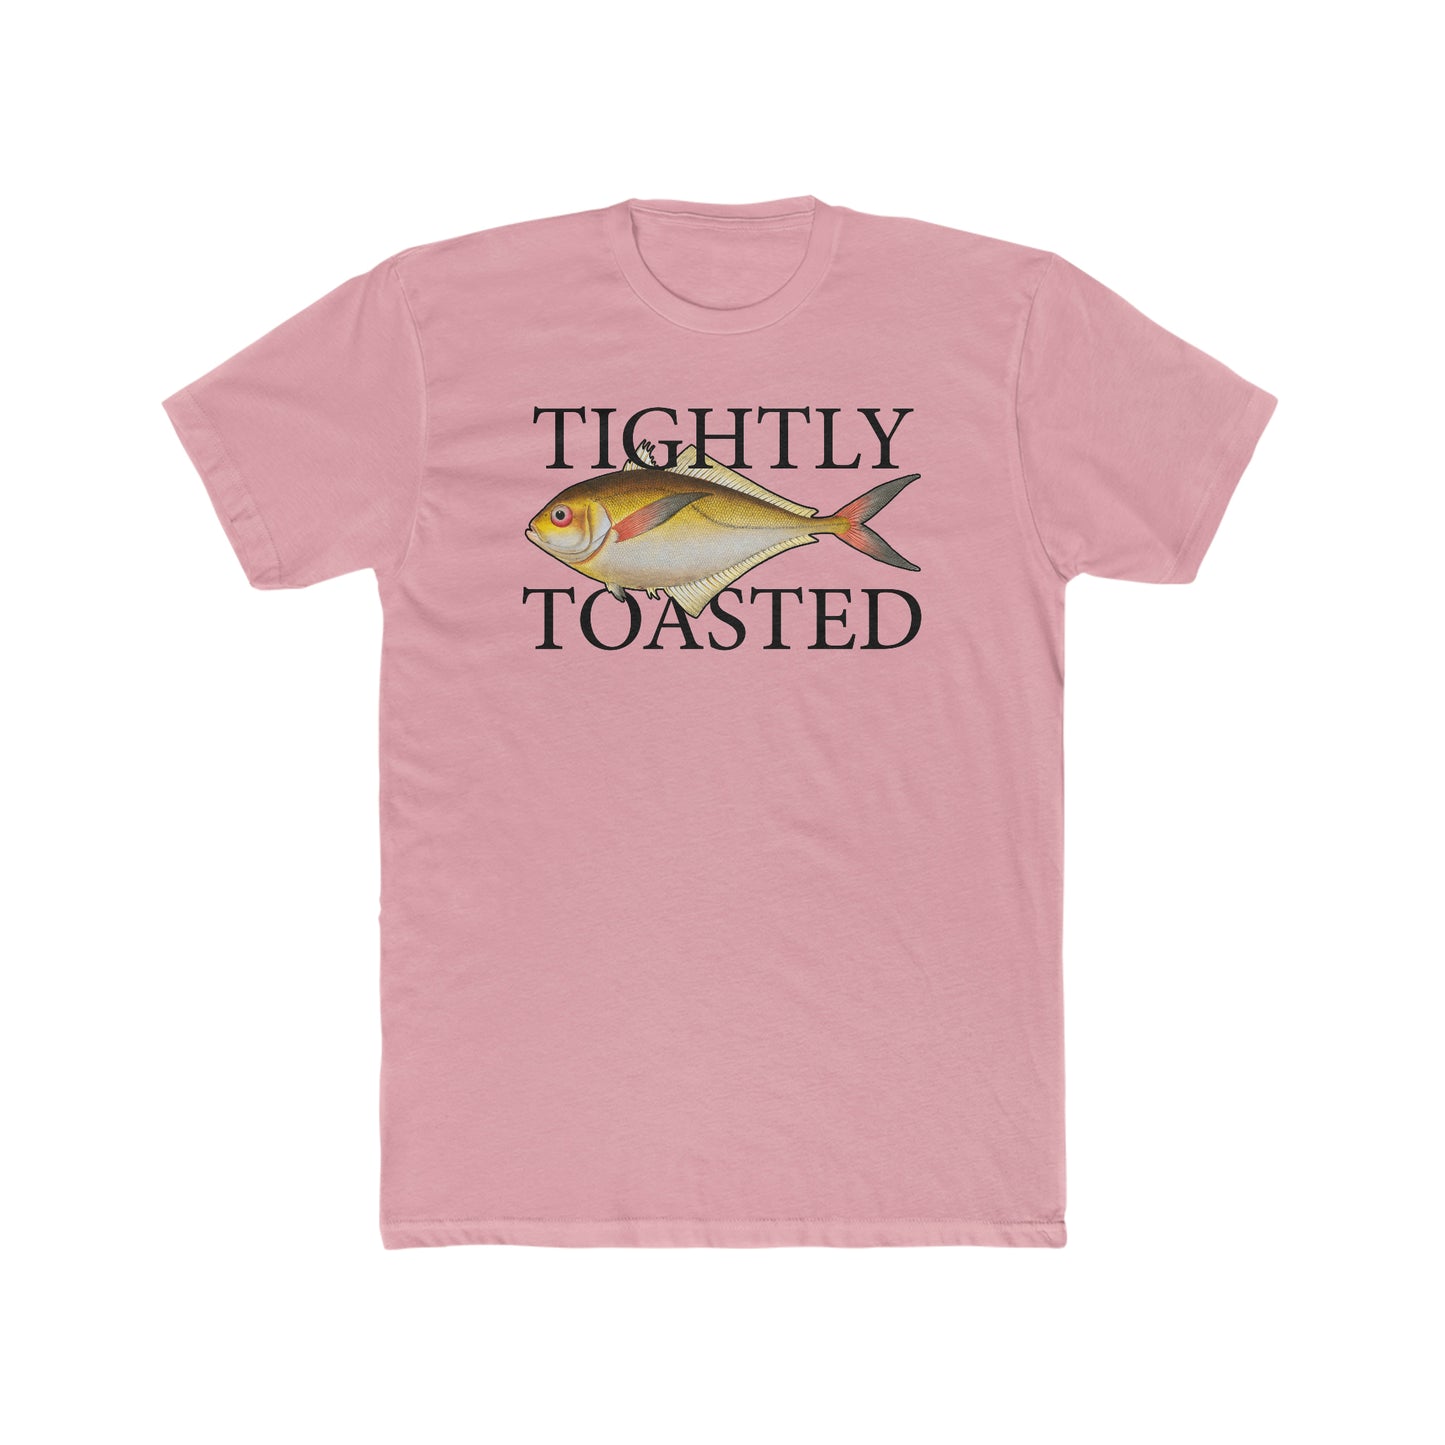 Tightly Toasted